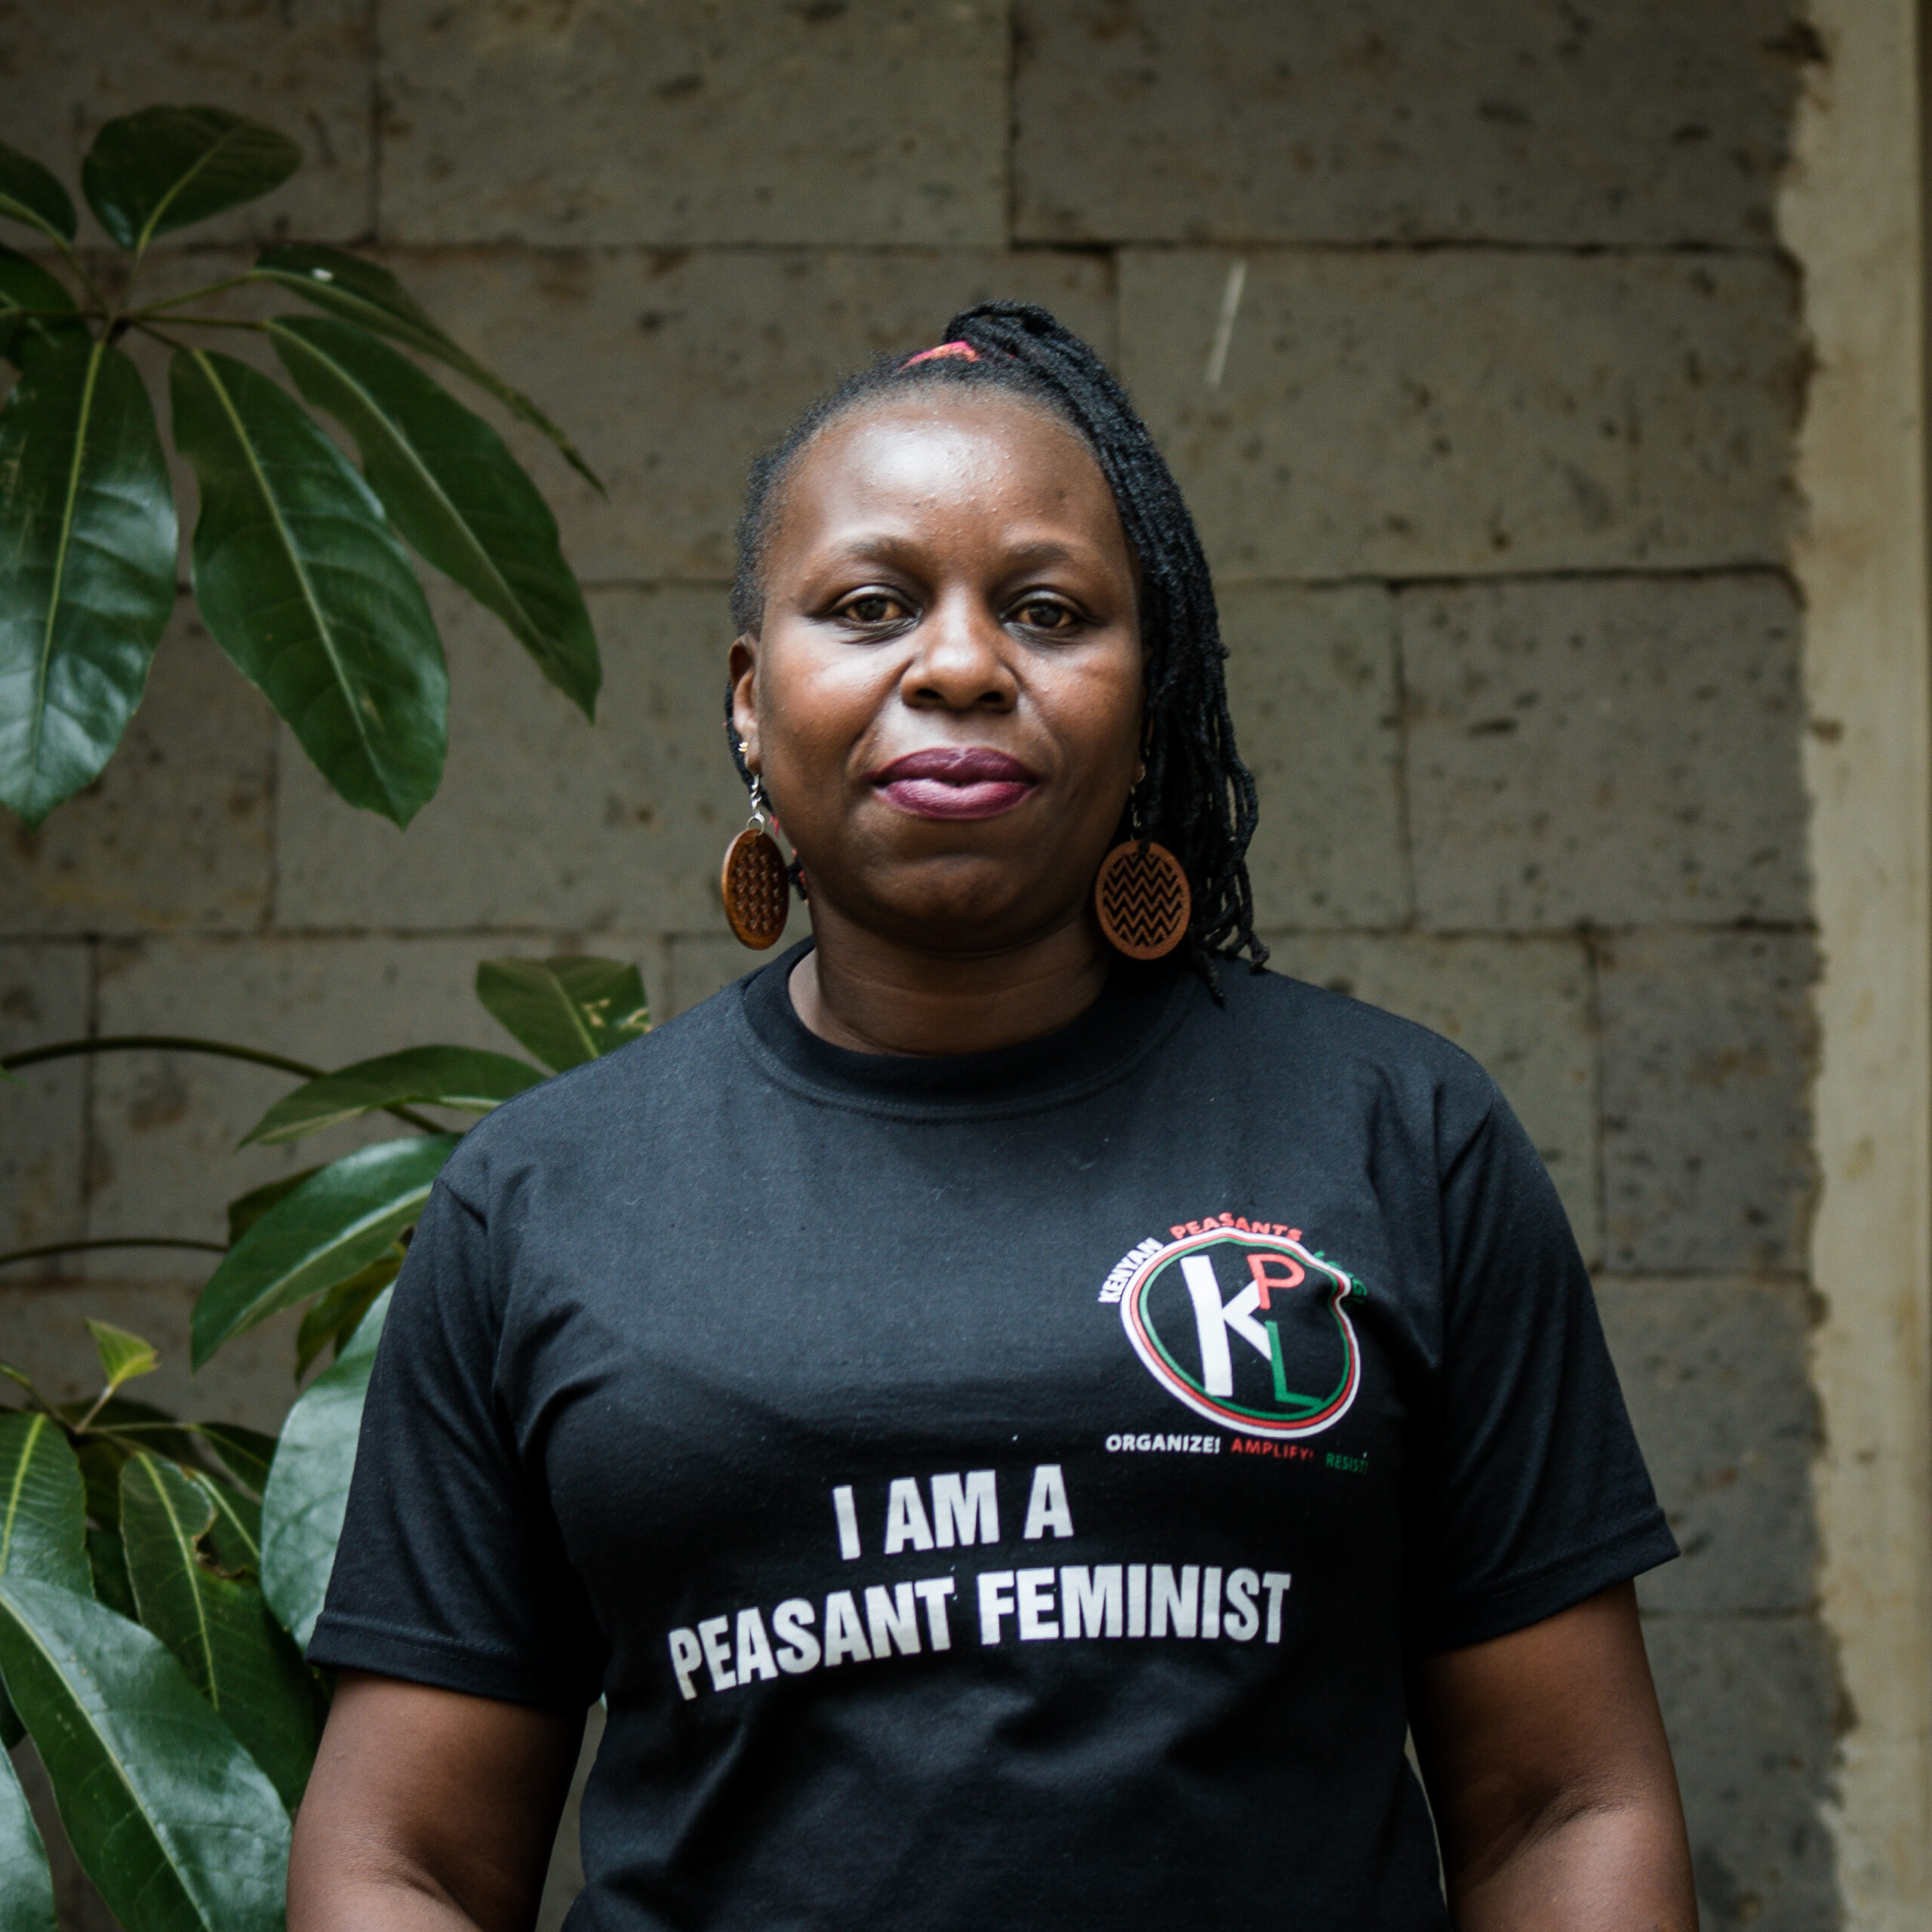 A close up shot of a Black woman. She is wearing a black t-shirt that says "I am a peasant feminist" with the KPL logo on the top right. She's staring at the camera with a slight smile. Few leaves are visible in the background. Pic credit: Ayşe Gürsöz